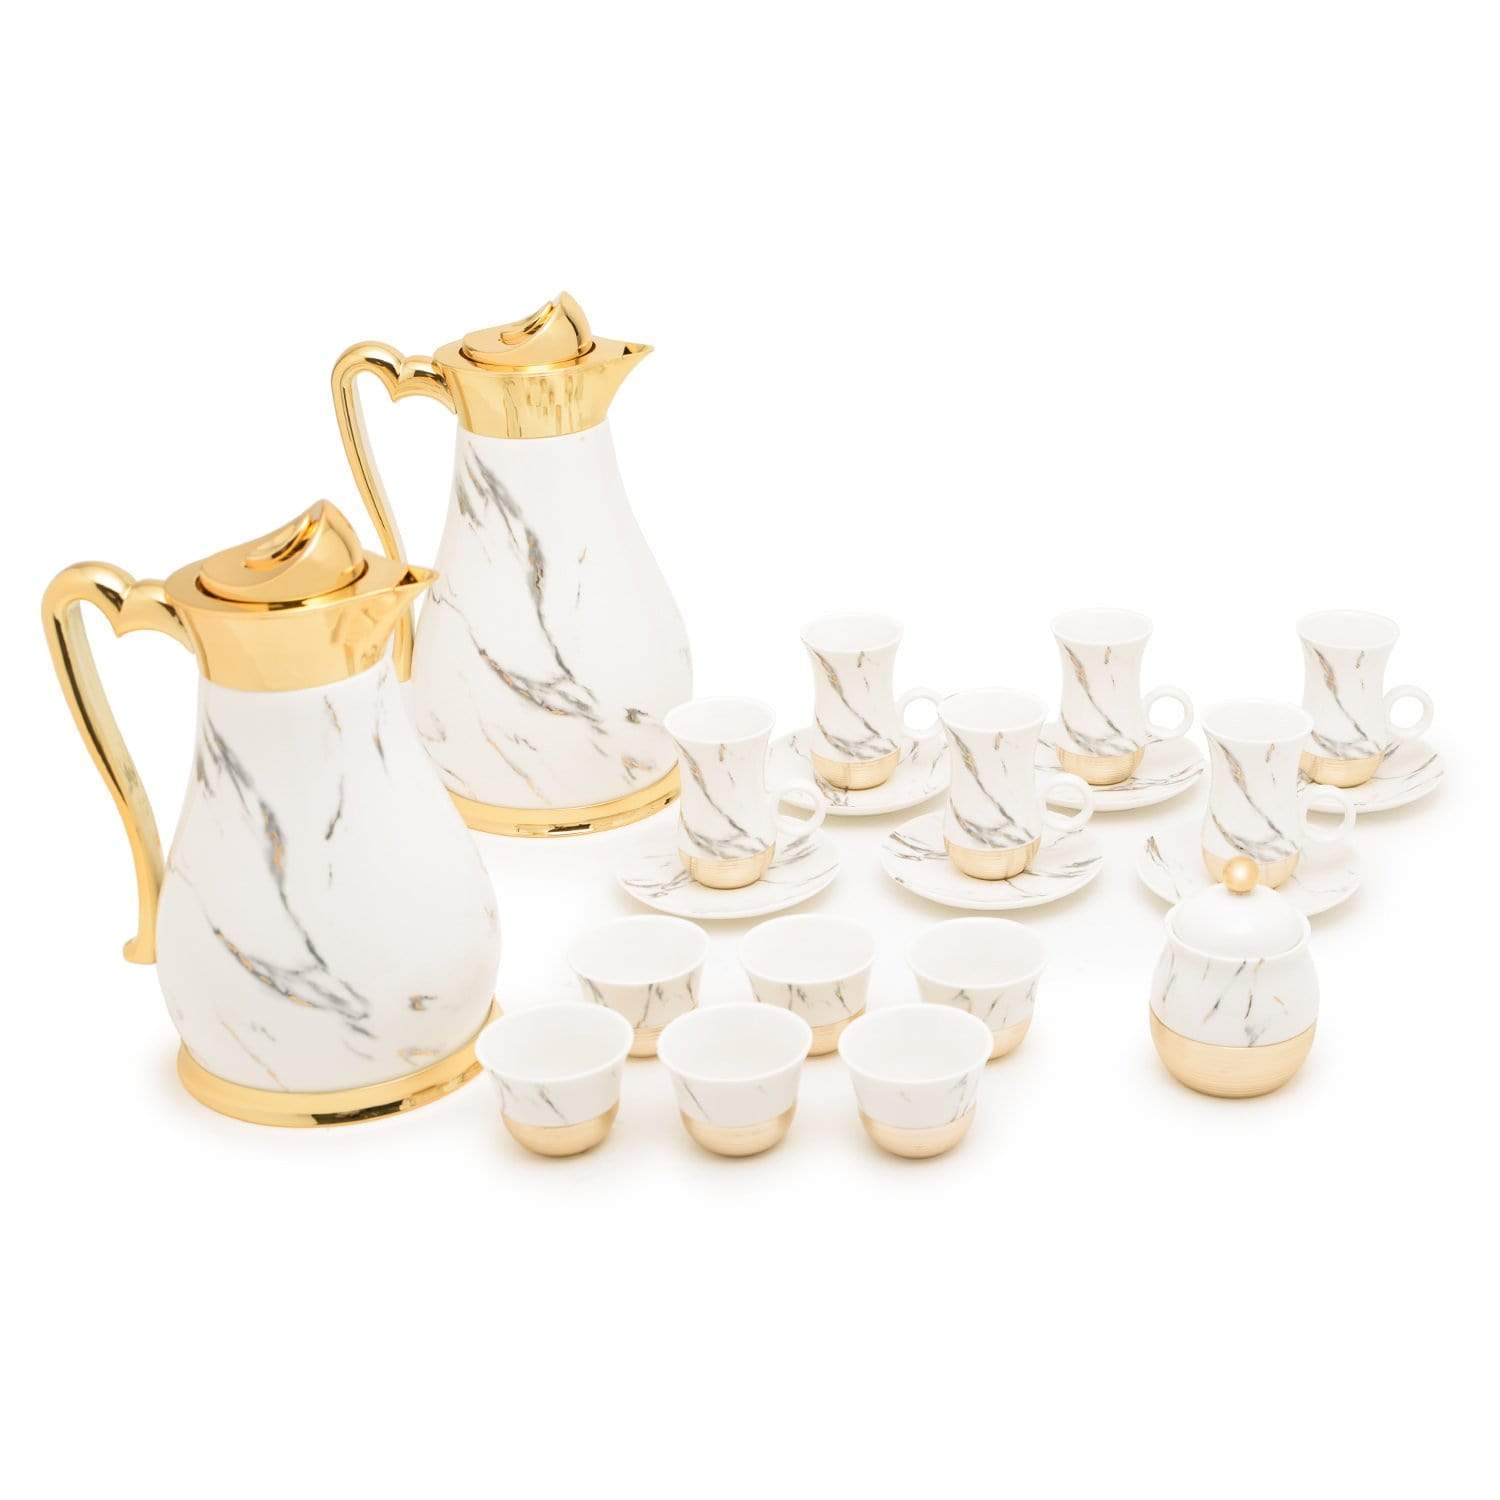 Am Dilwen Gold with Decorated Flask Tea Set - 22 Pieces - AM9415-S21/042 - Jashanmal Home